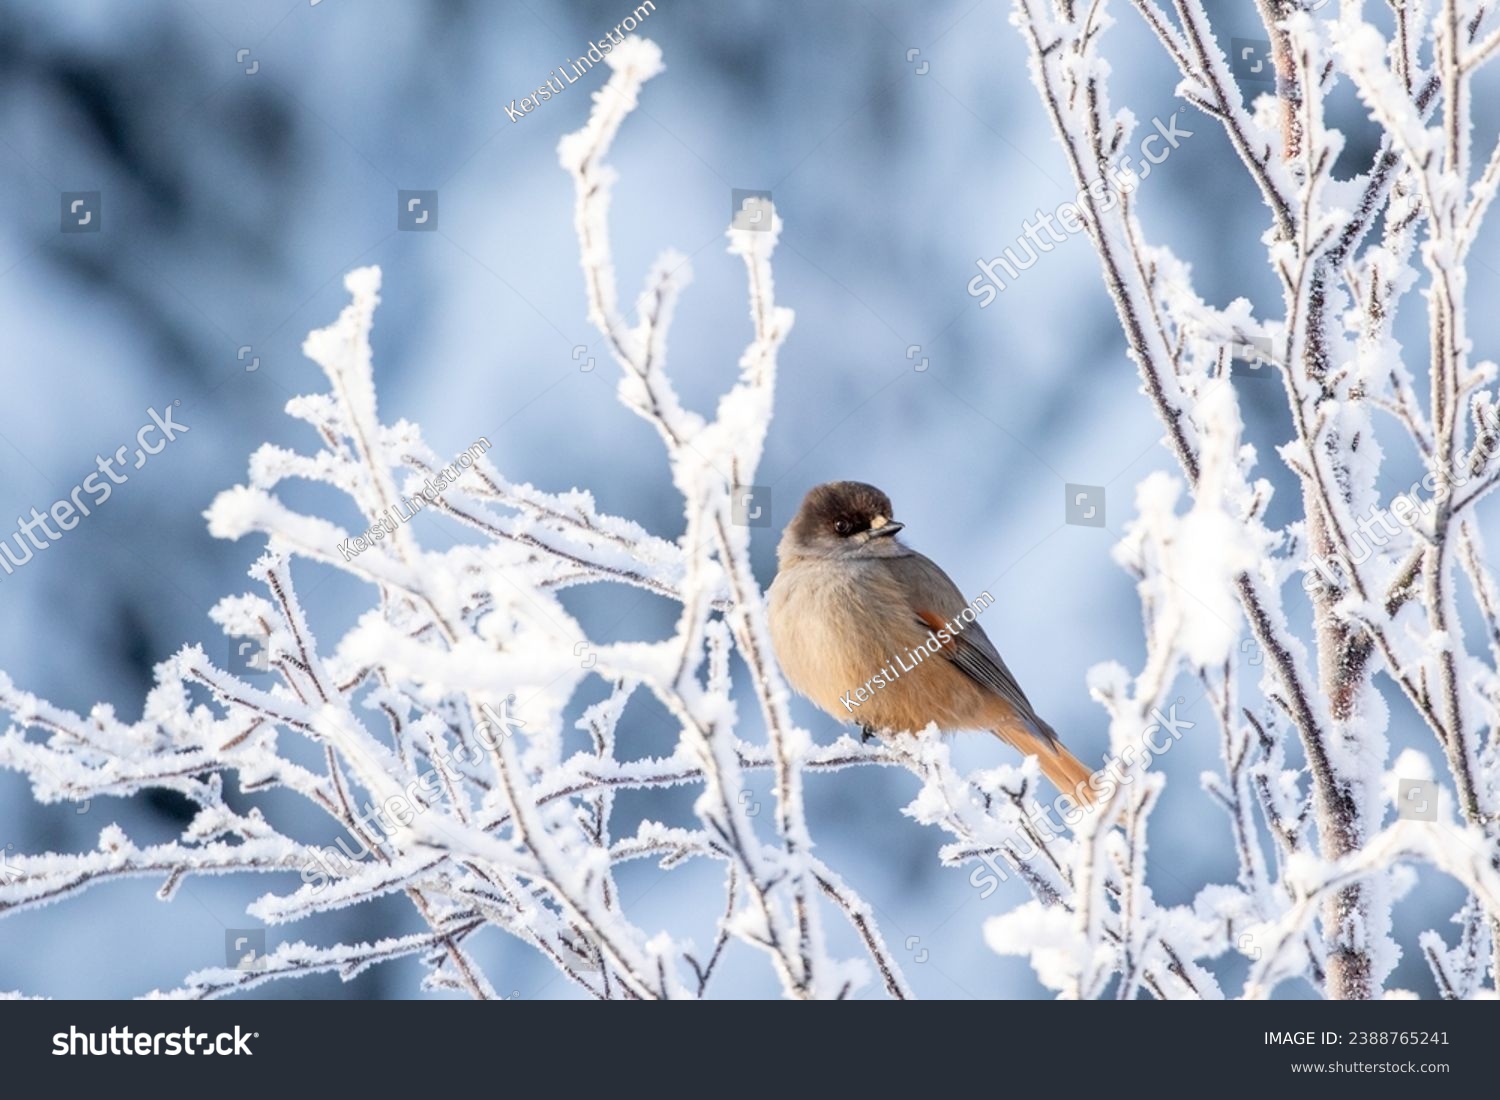 Beautiful and cute corvine, Siberian jay (Perisoreus infaustus) perched on a snowy branch on a cold winter morning at Finnish taiga forest #2388765241